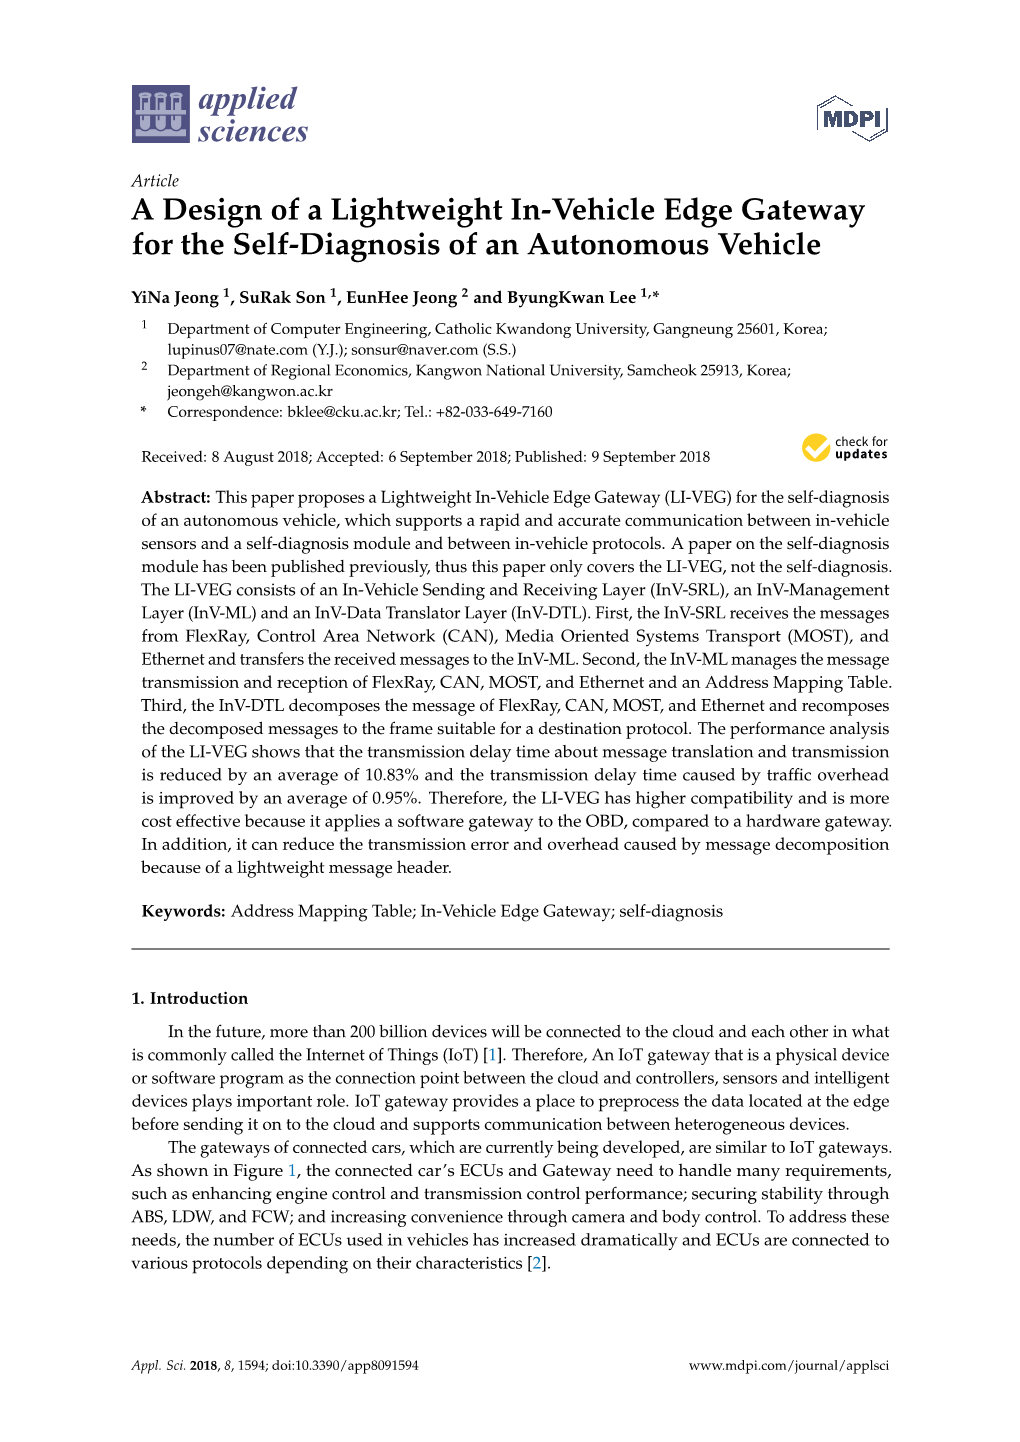 A Design of a Lightweight In-Vehicle Edge Gateway for the Self-Diagnosis of an Autonomous Vehicle